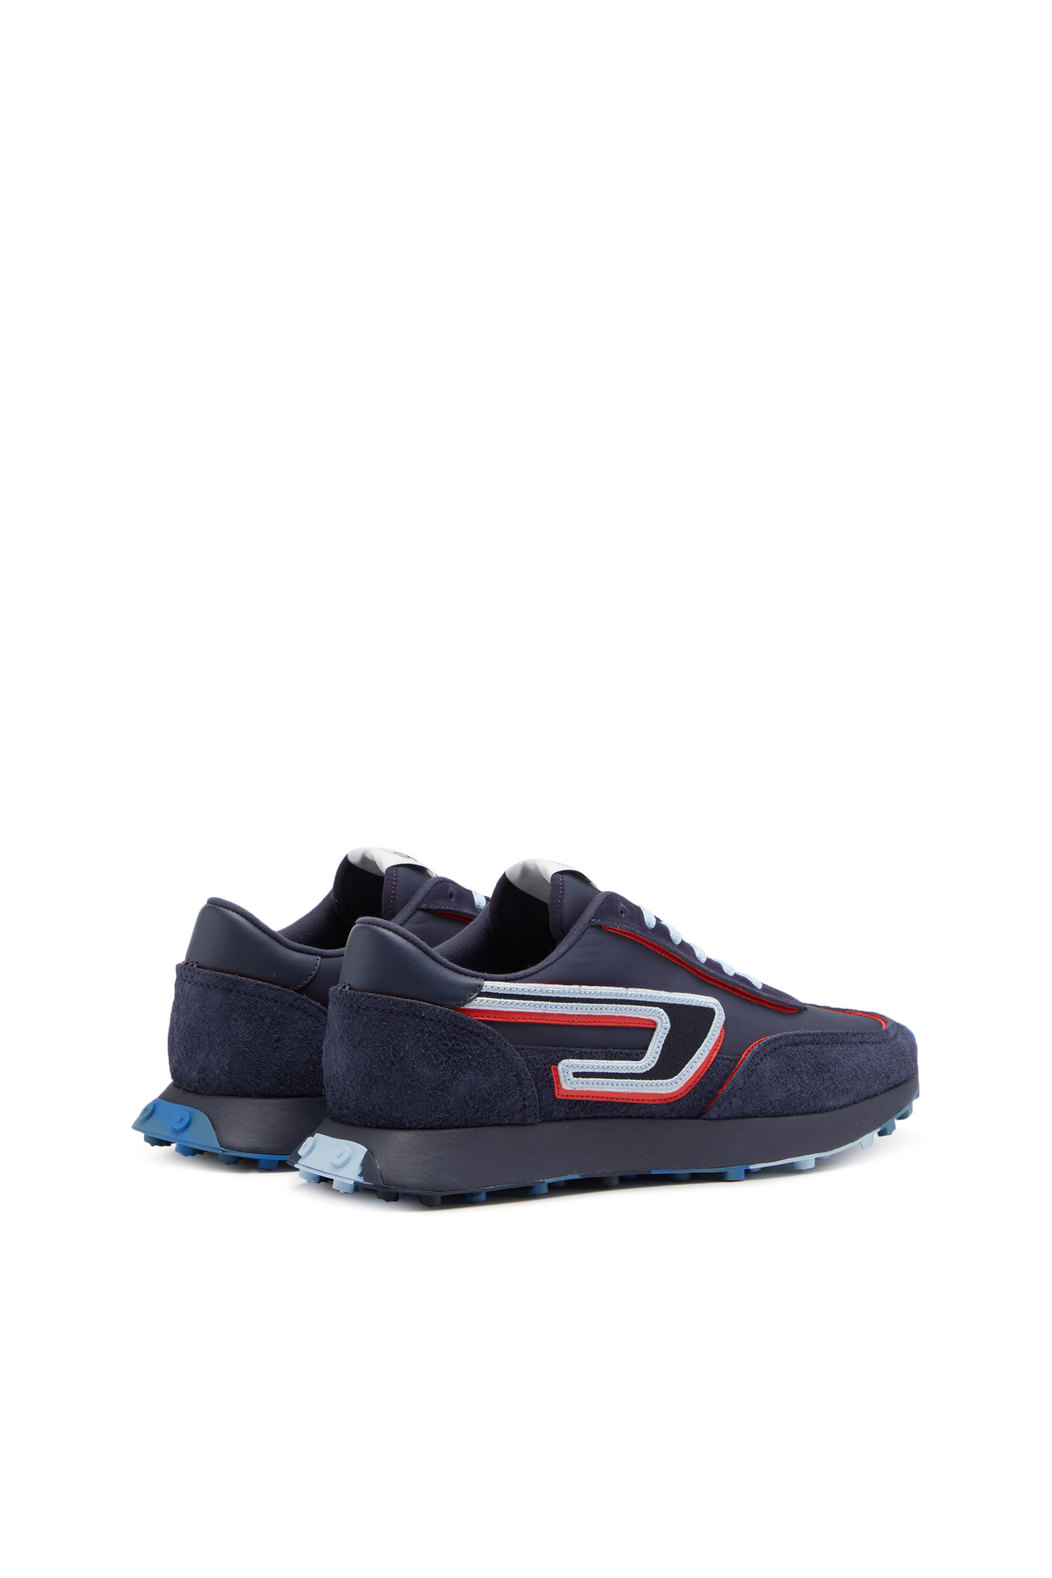 S-Racer Lc - Sneakers in nylon and hairy suede